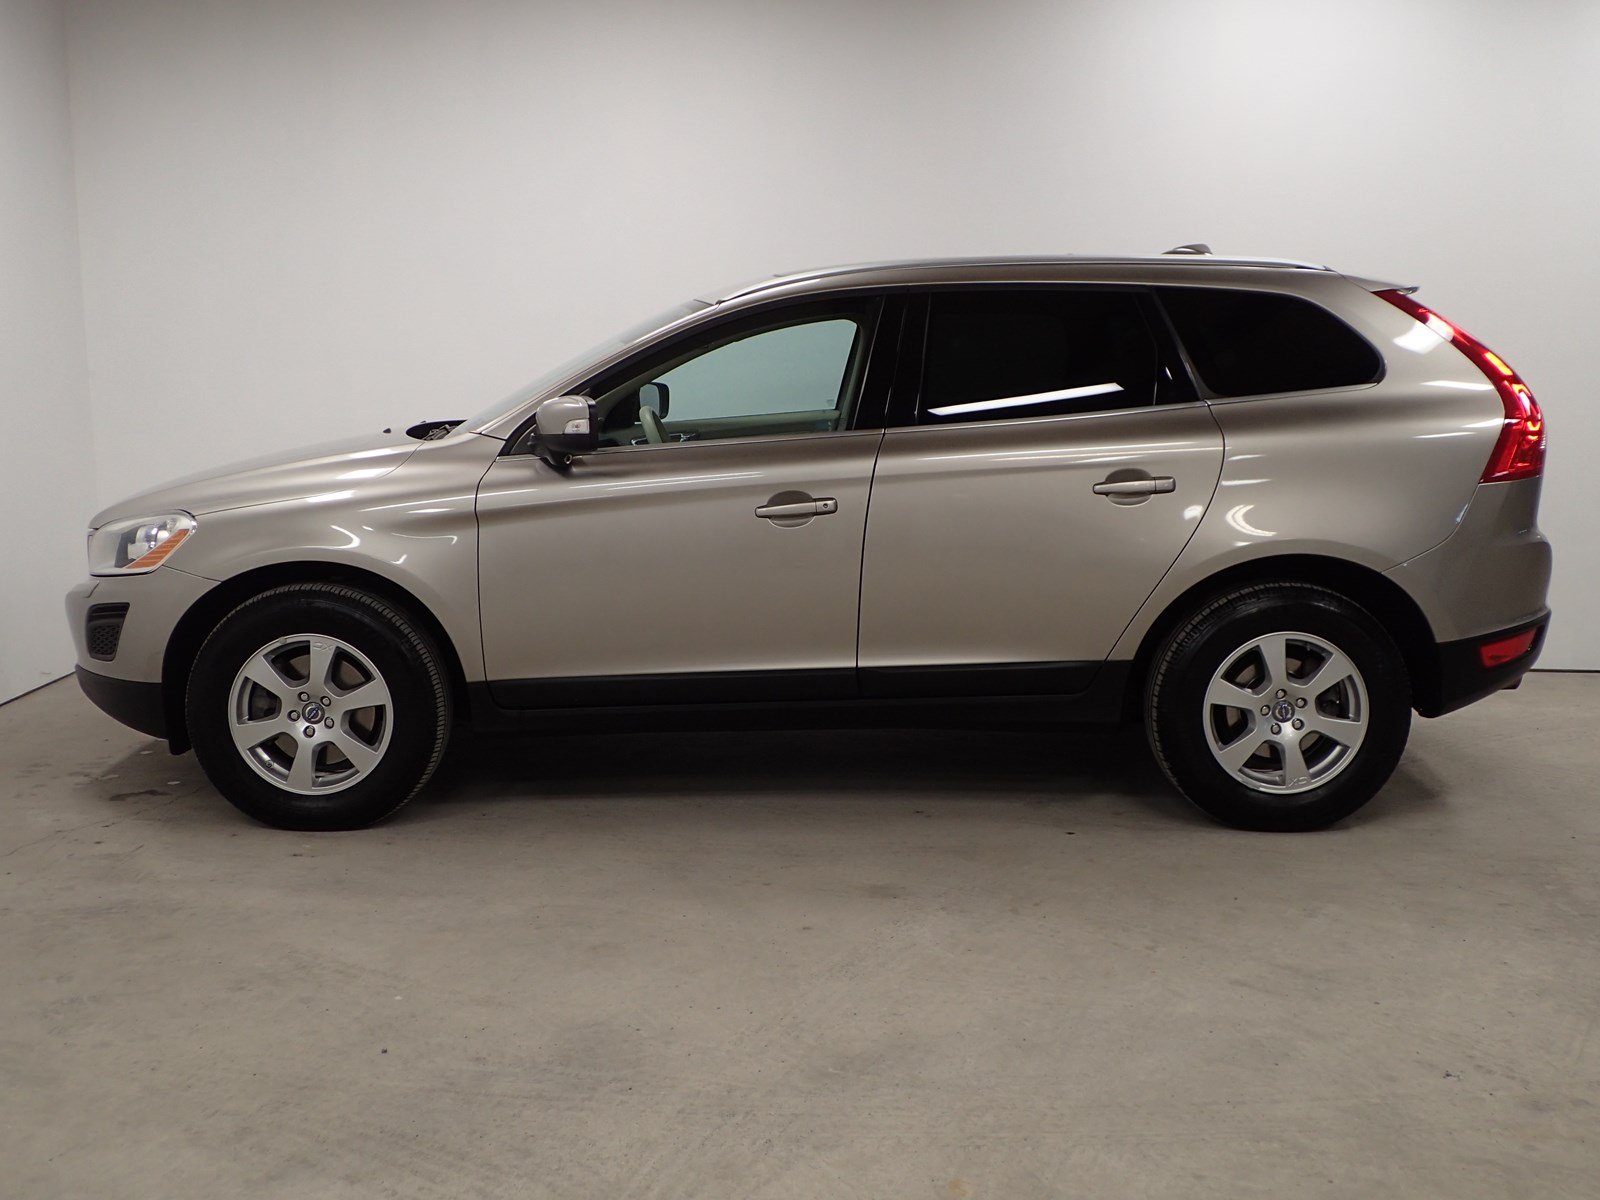 PreOwned 2012 Volvo XC60 3.2 AWD Premier Sport Utility in